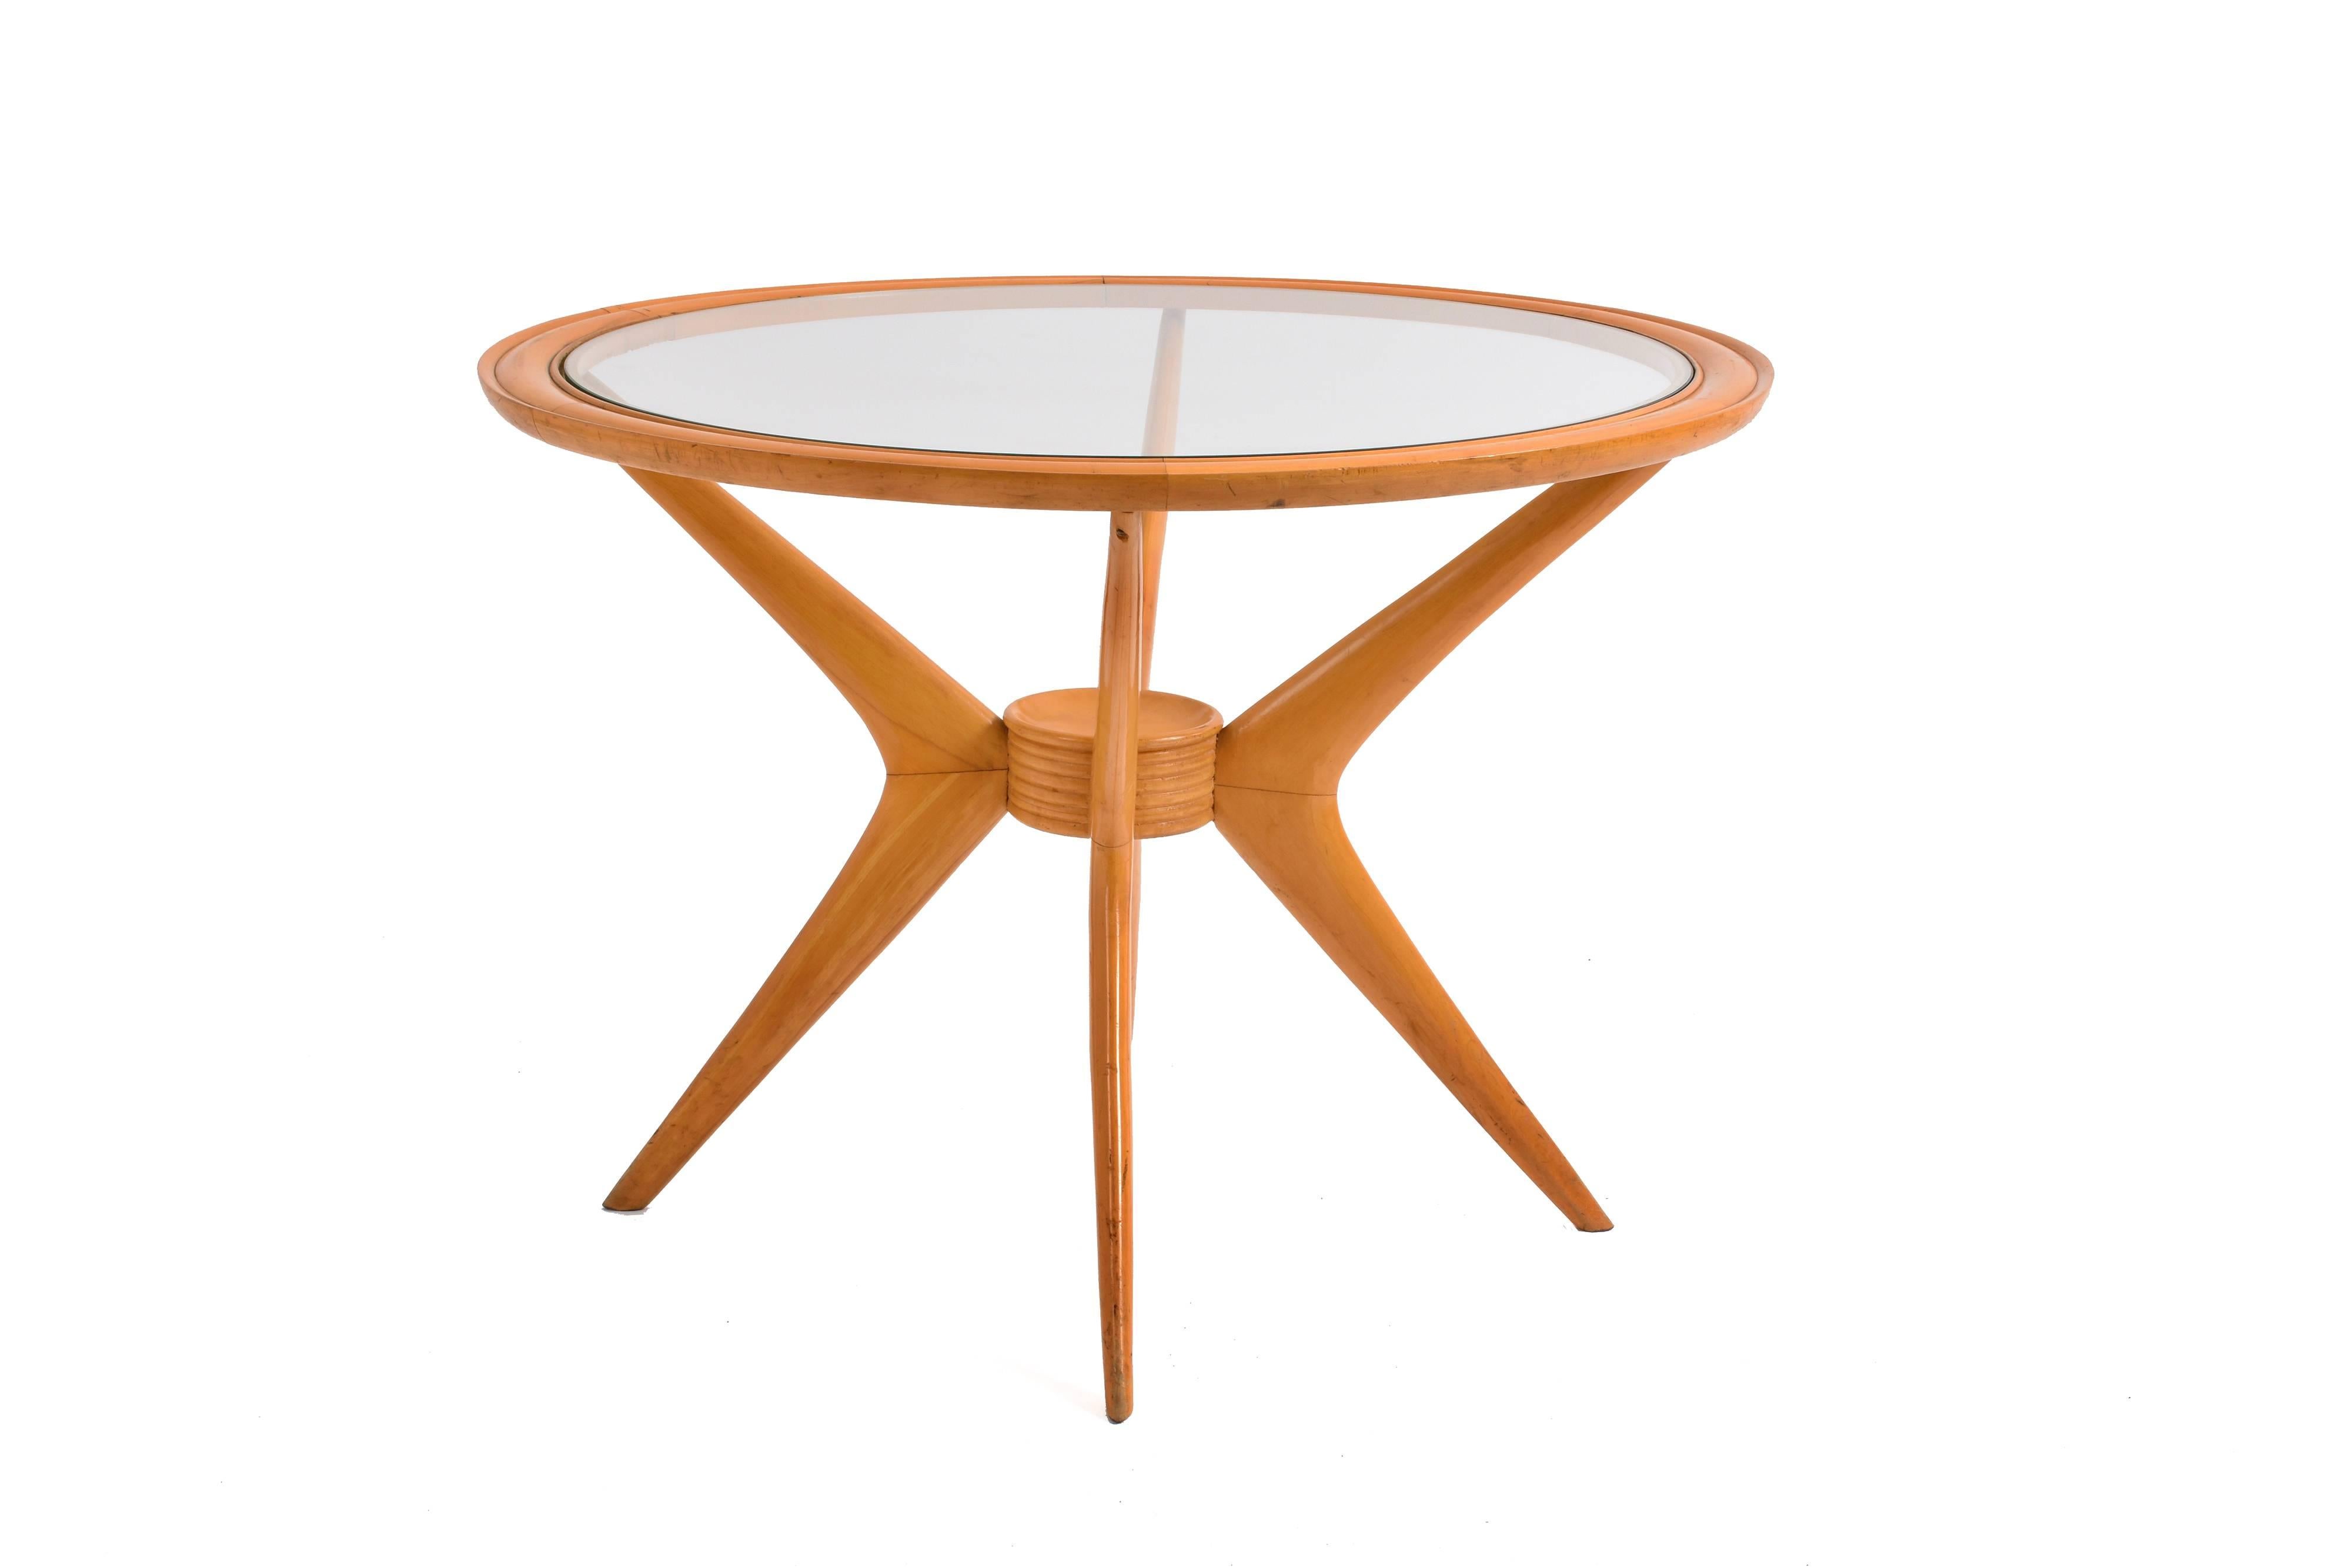 Mid-Century Modern Midcentury Coffee Table in Birchwood by Cesare Lacca for Cassina, Italian, 1950s